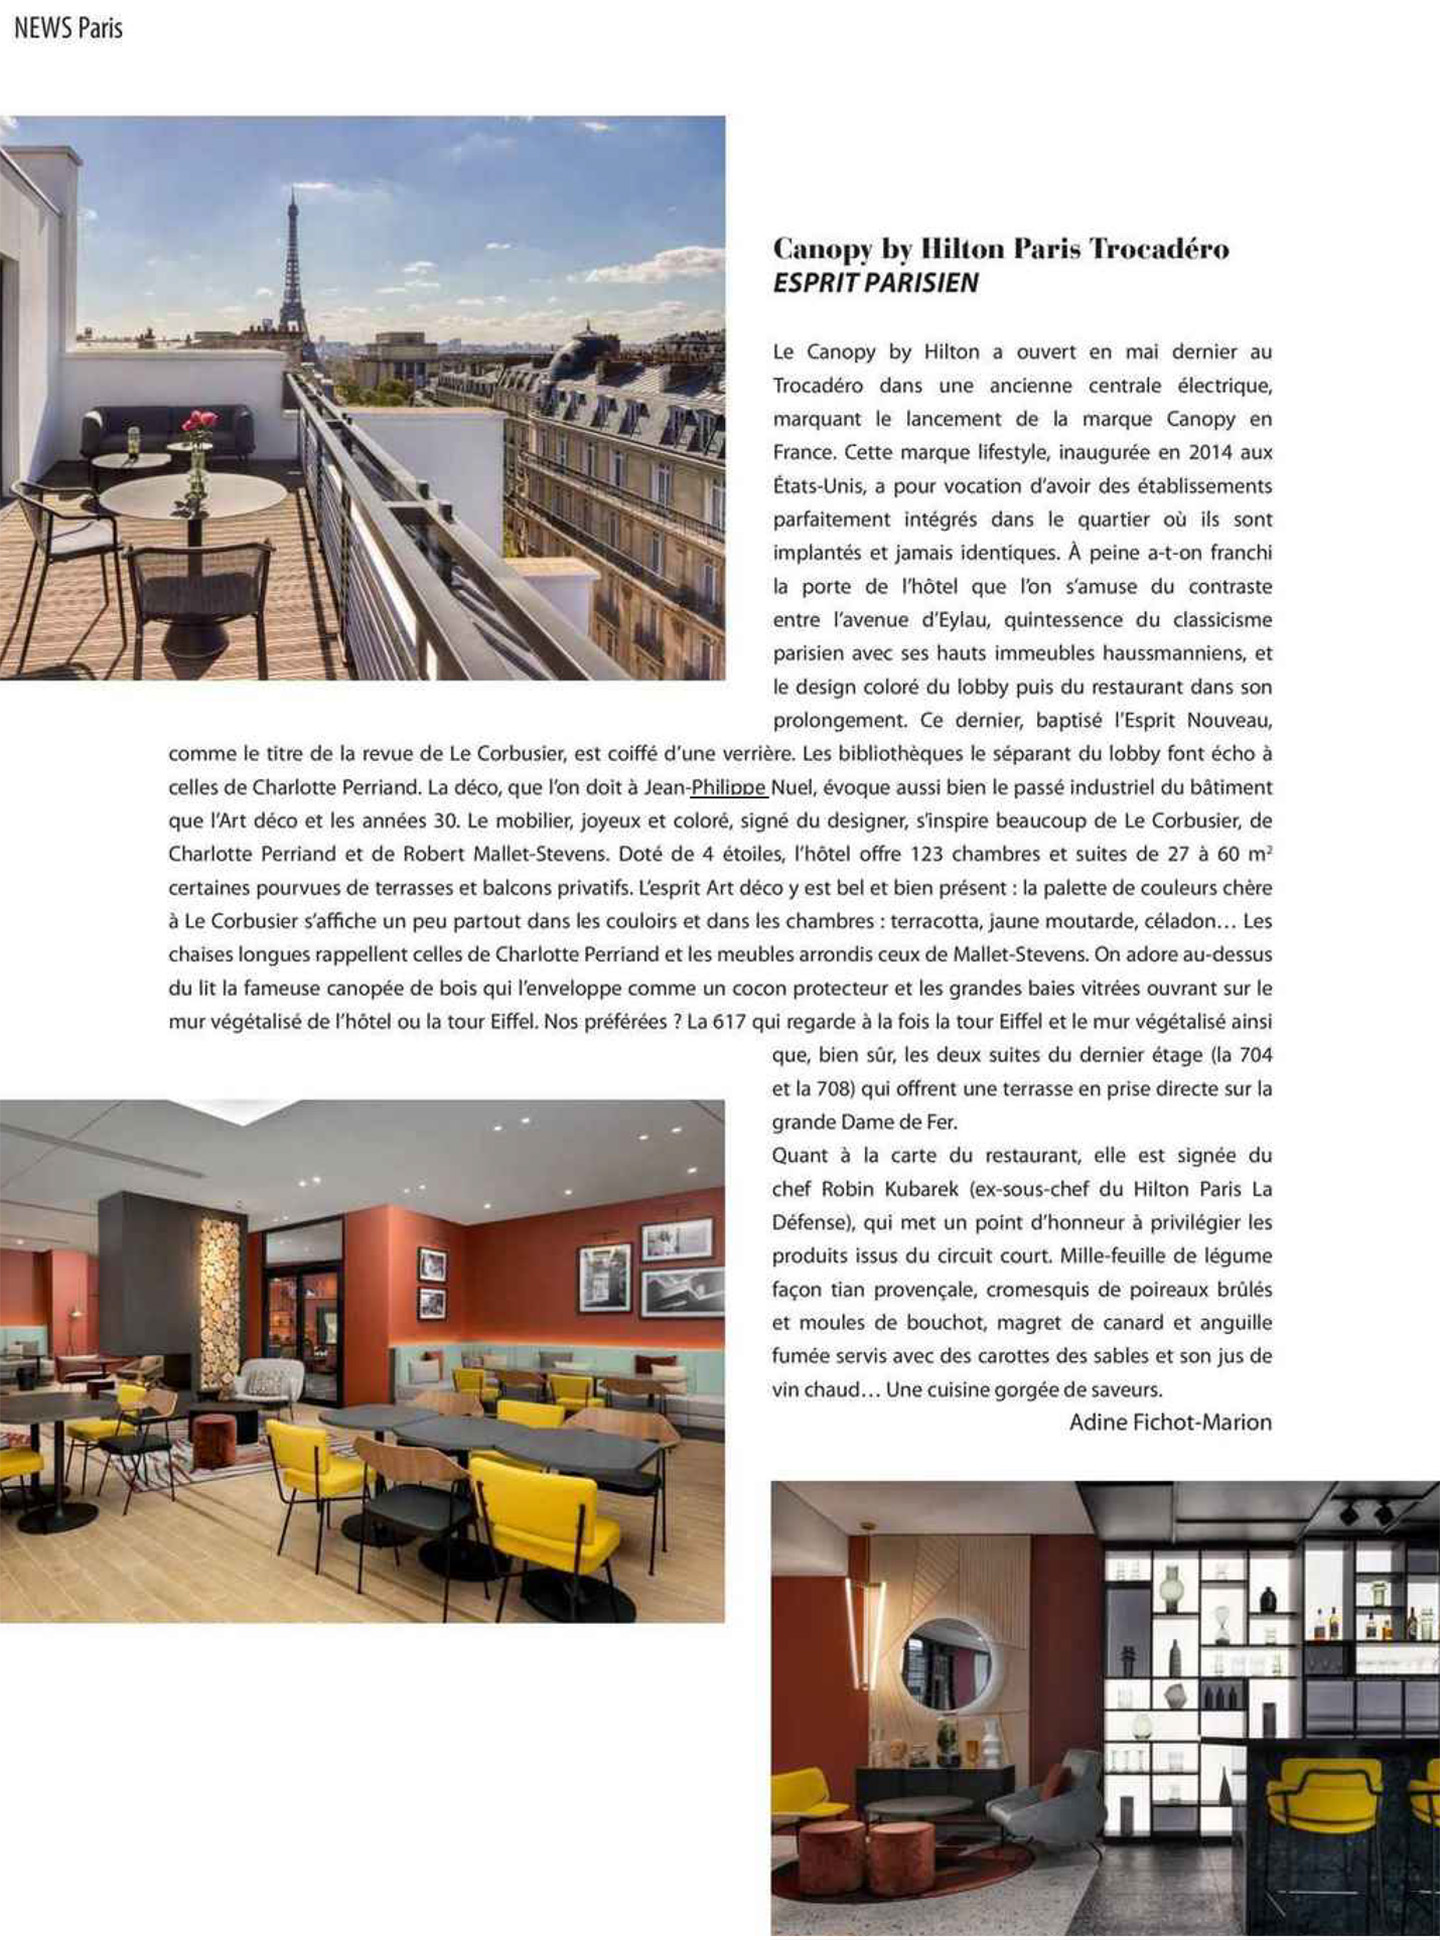 Article on the Canopy by Hilton Paris Trocadero designed by jean-Philippe Nuel studio in Voyage de luxe magazine, new lifestyle hotel, luxury interior design, paris center, french luxury hotel